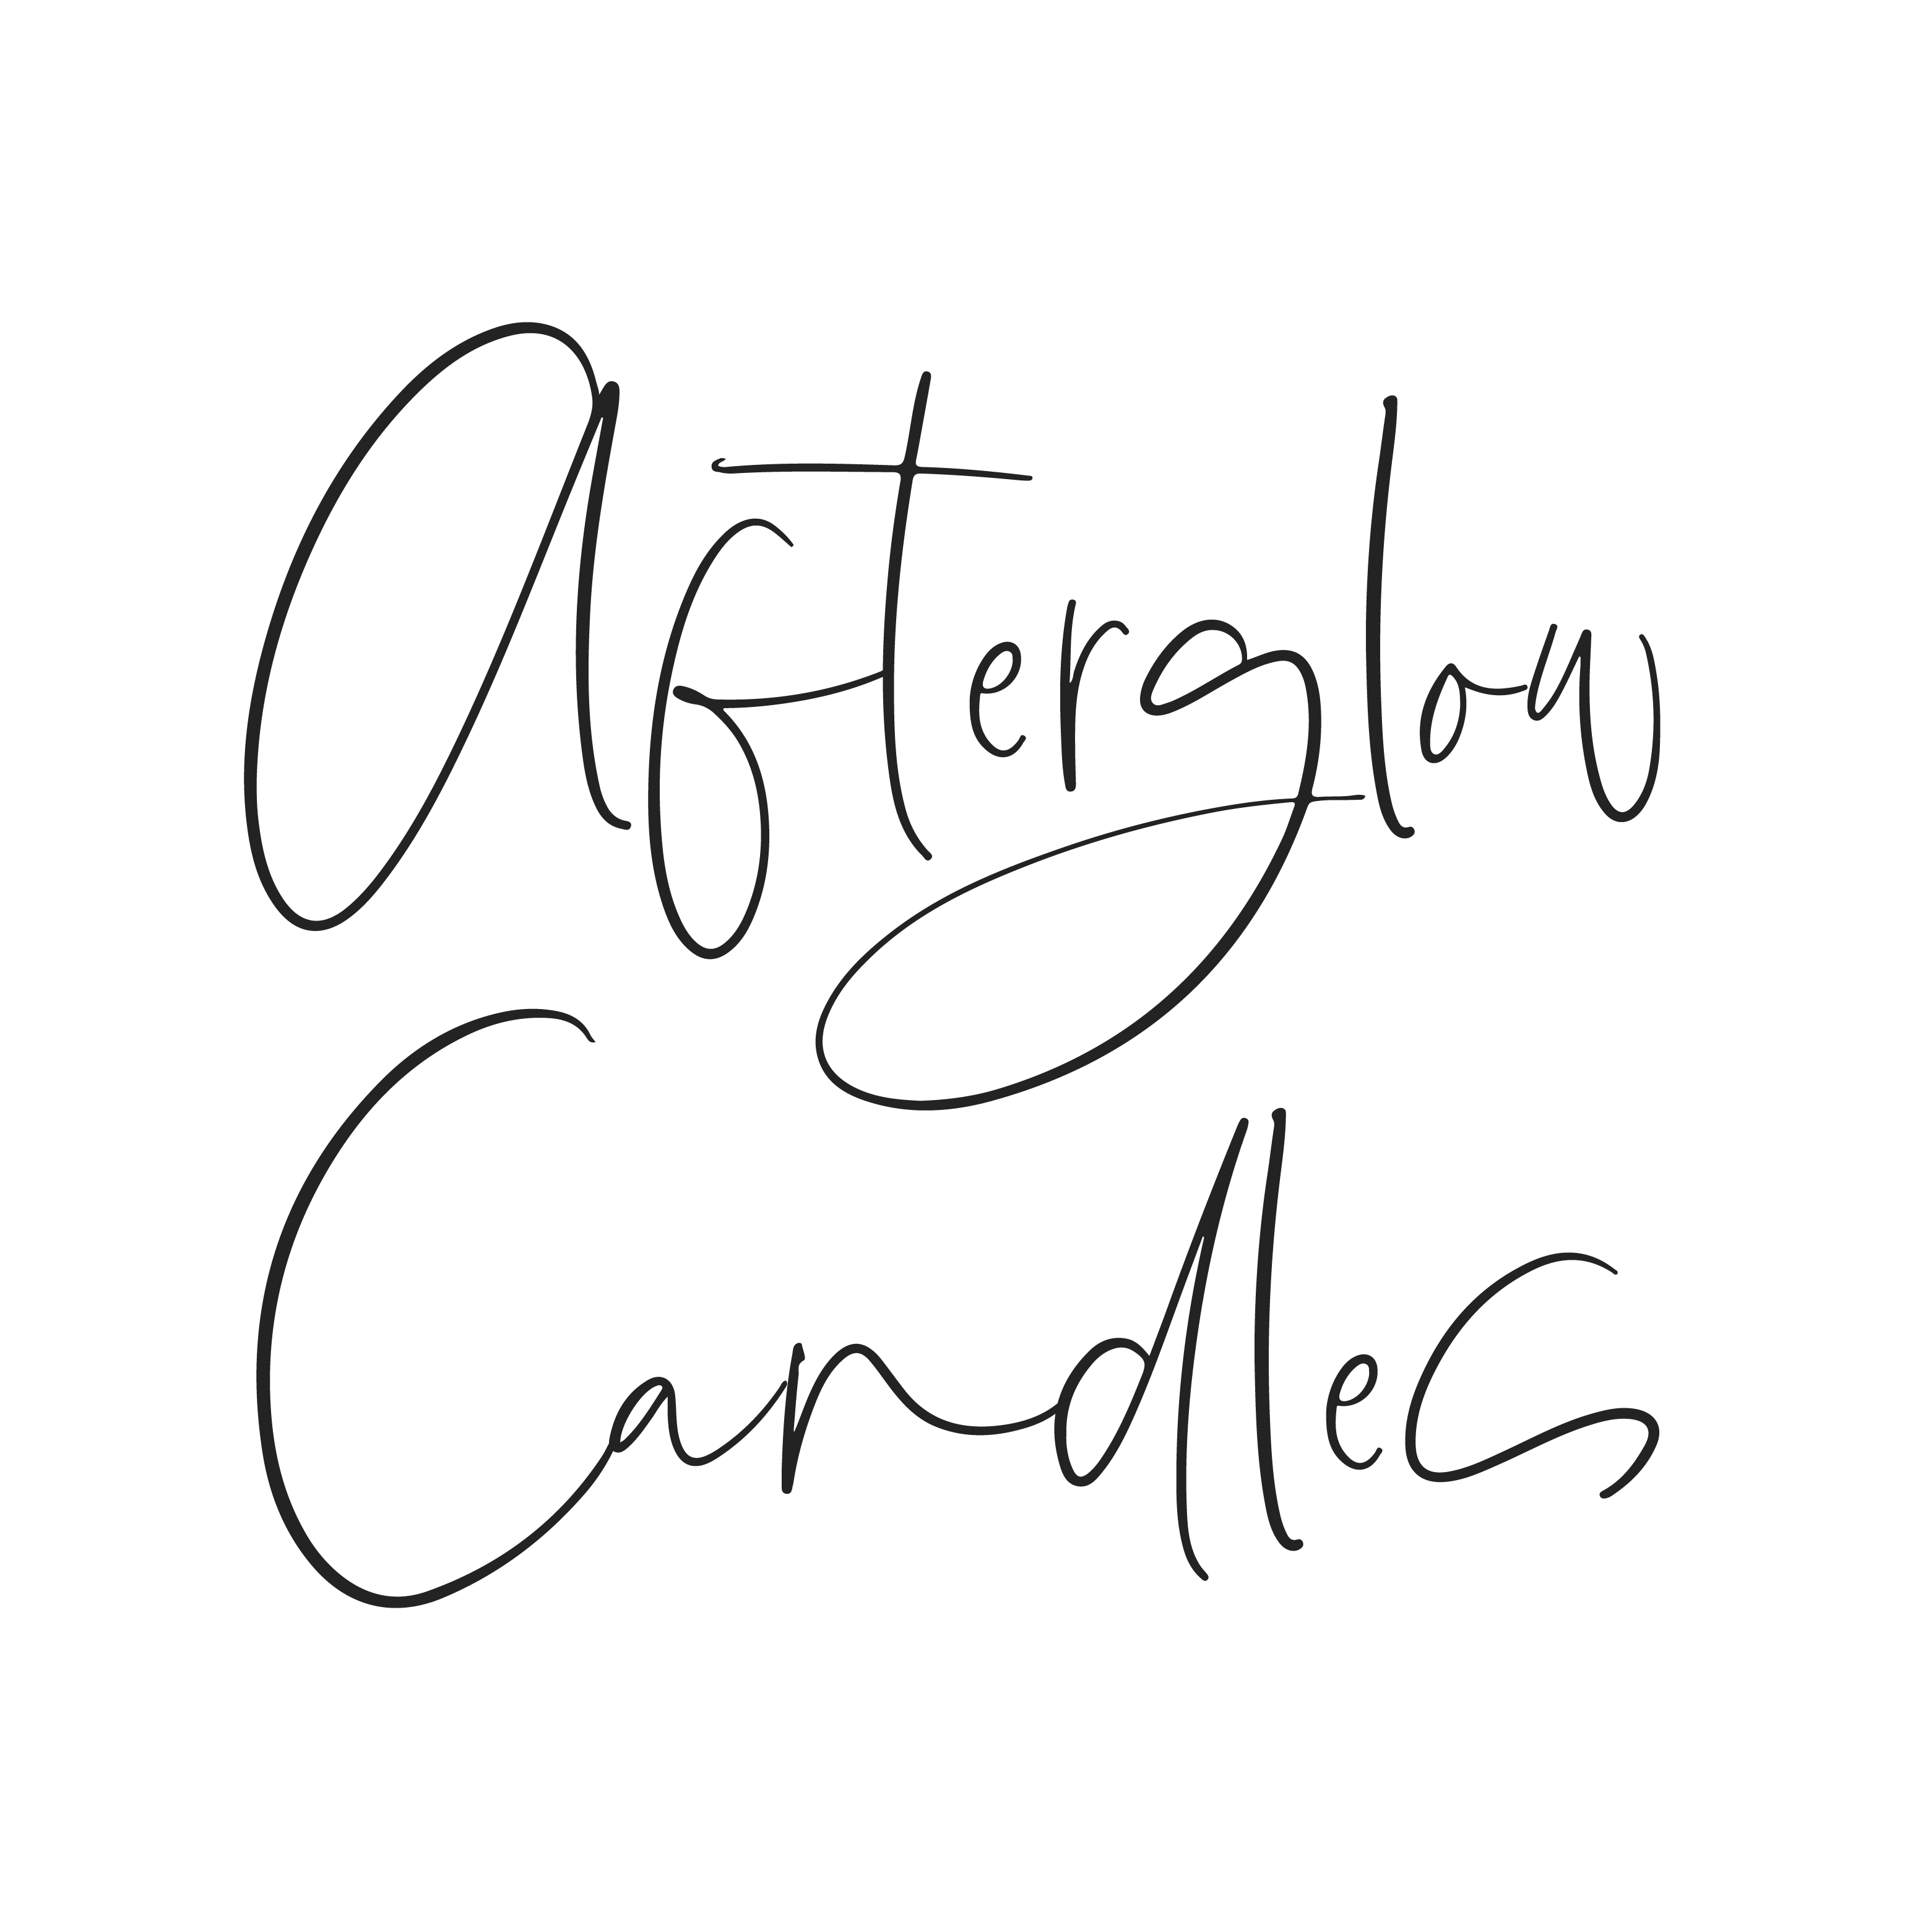 Afterglow Candles